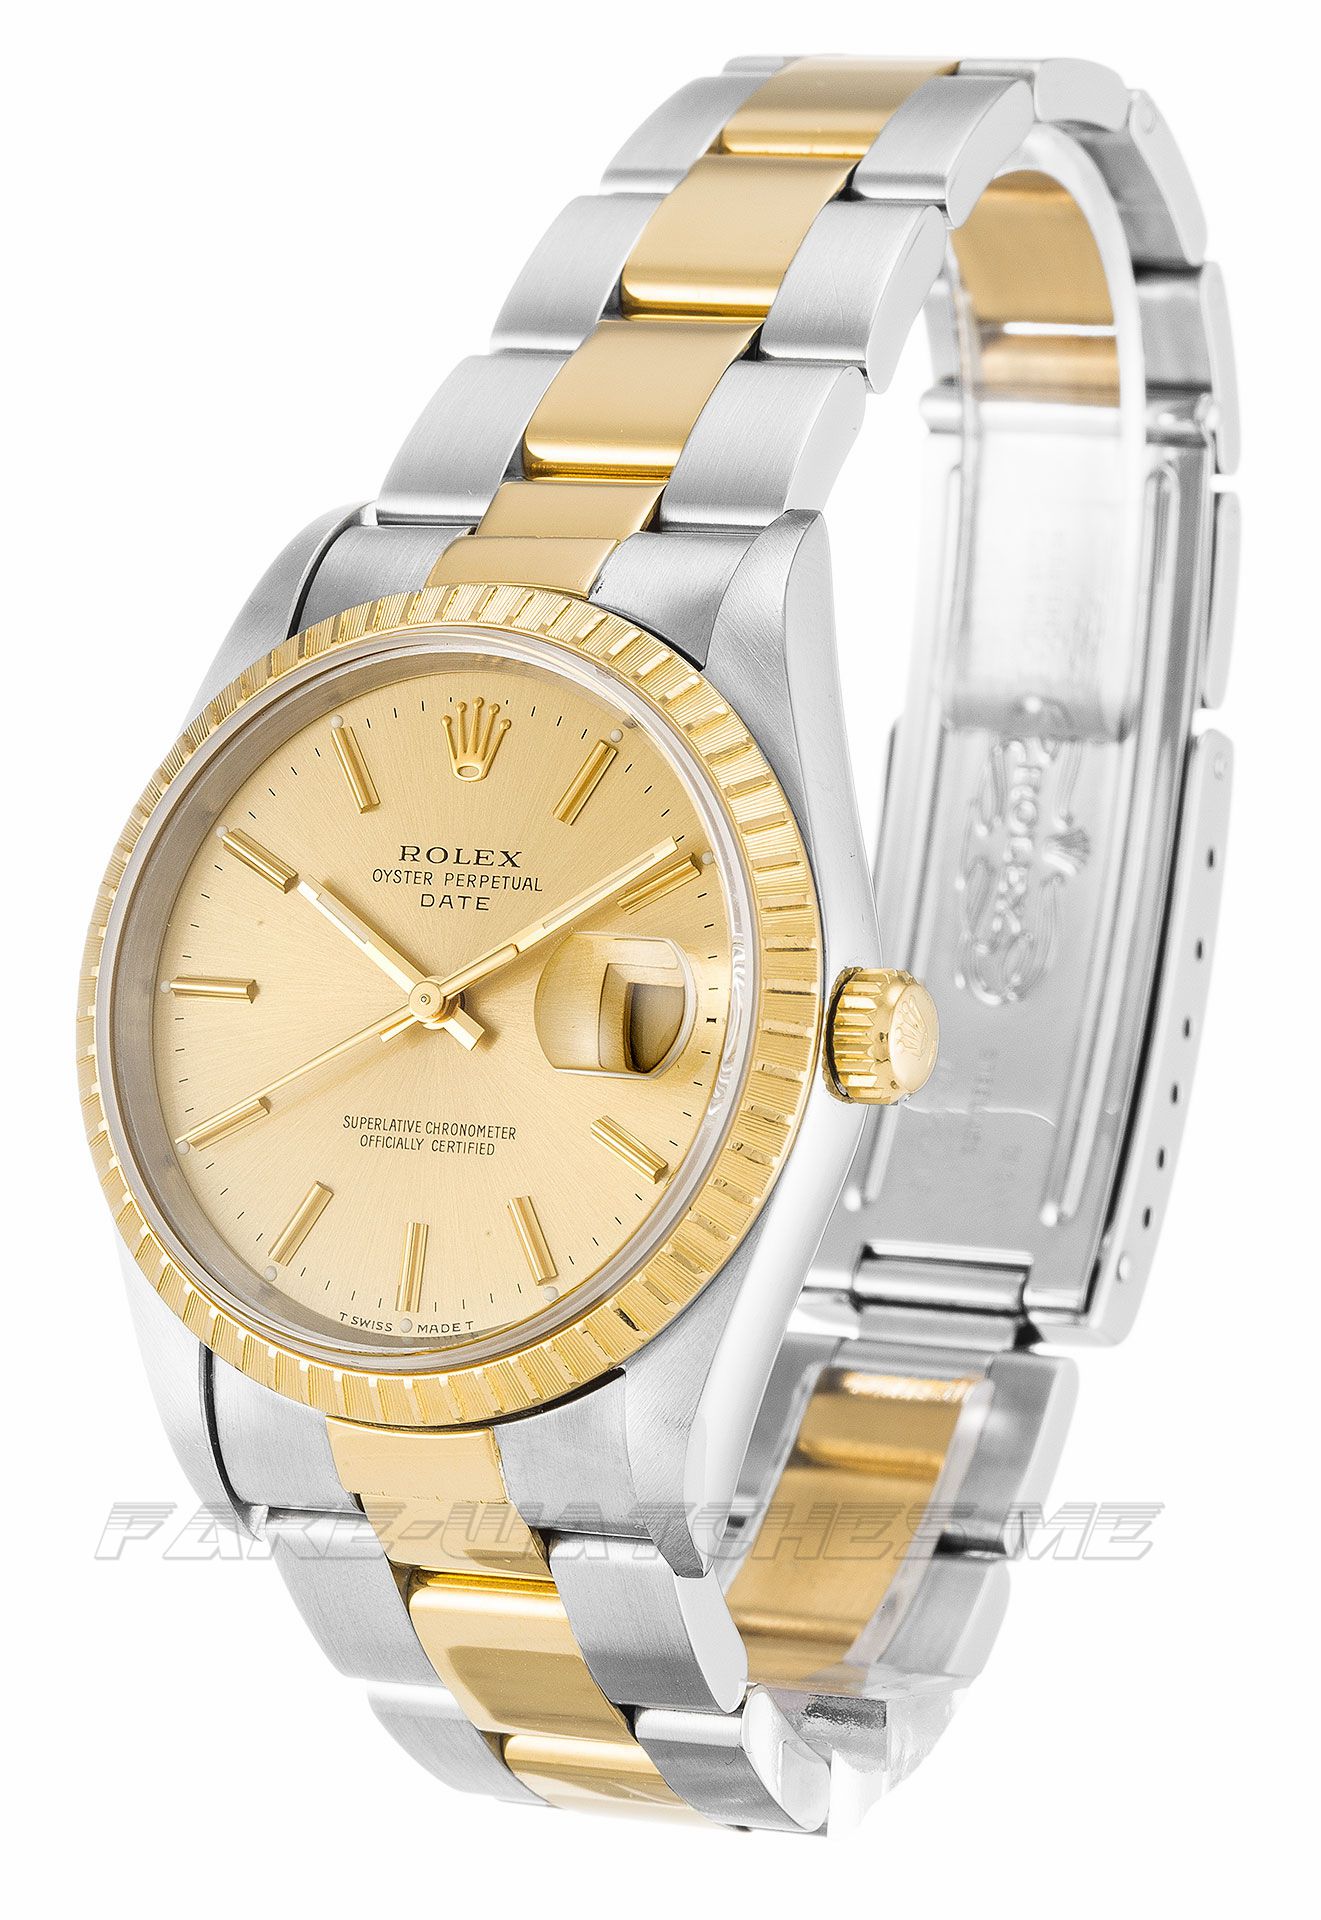 Rolex Oyster Perpetual Date Unisex Automaticl 15223